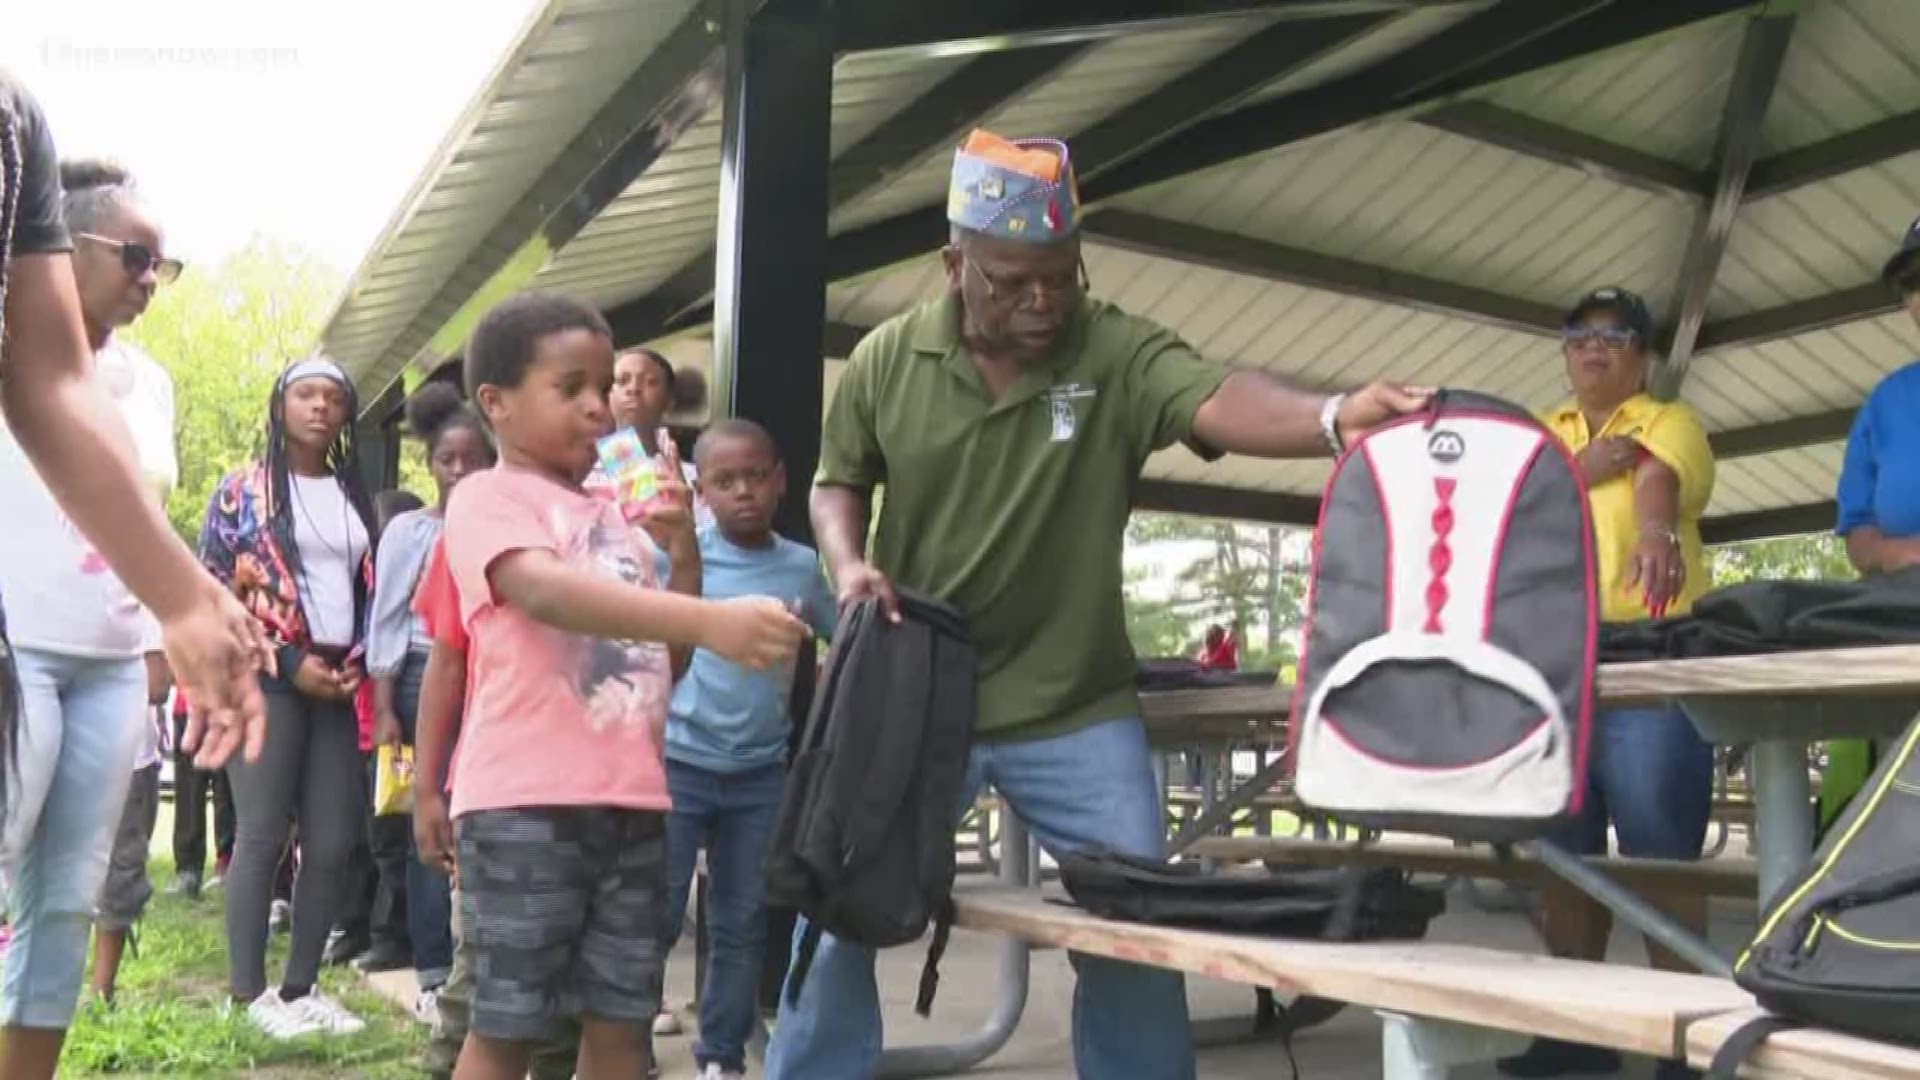 The group took over Gosnold Park in Hampton on Thursday to give out supplies. Volunteers handed out backpacks and spoke with the students and parents. Organizers said they want kids to feel confident when they get to the classroom.